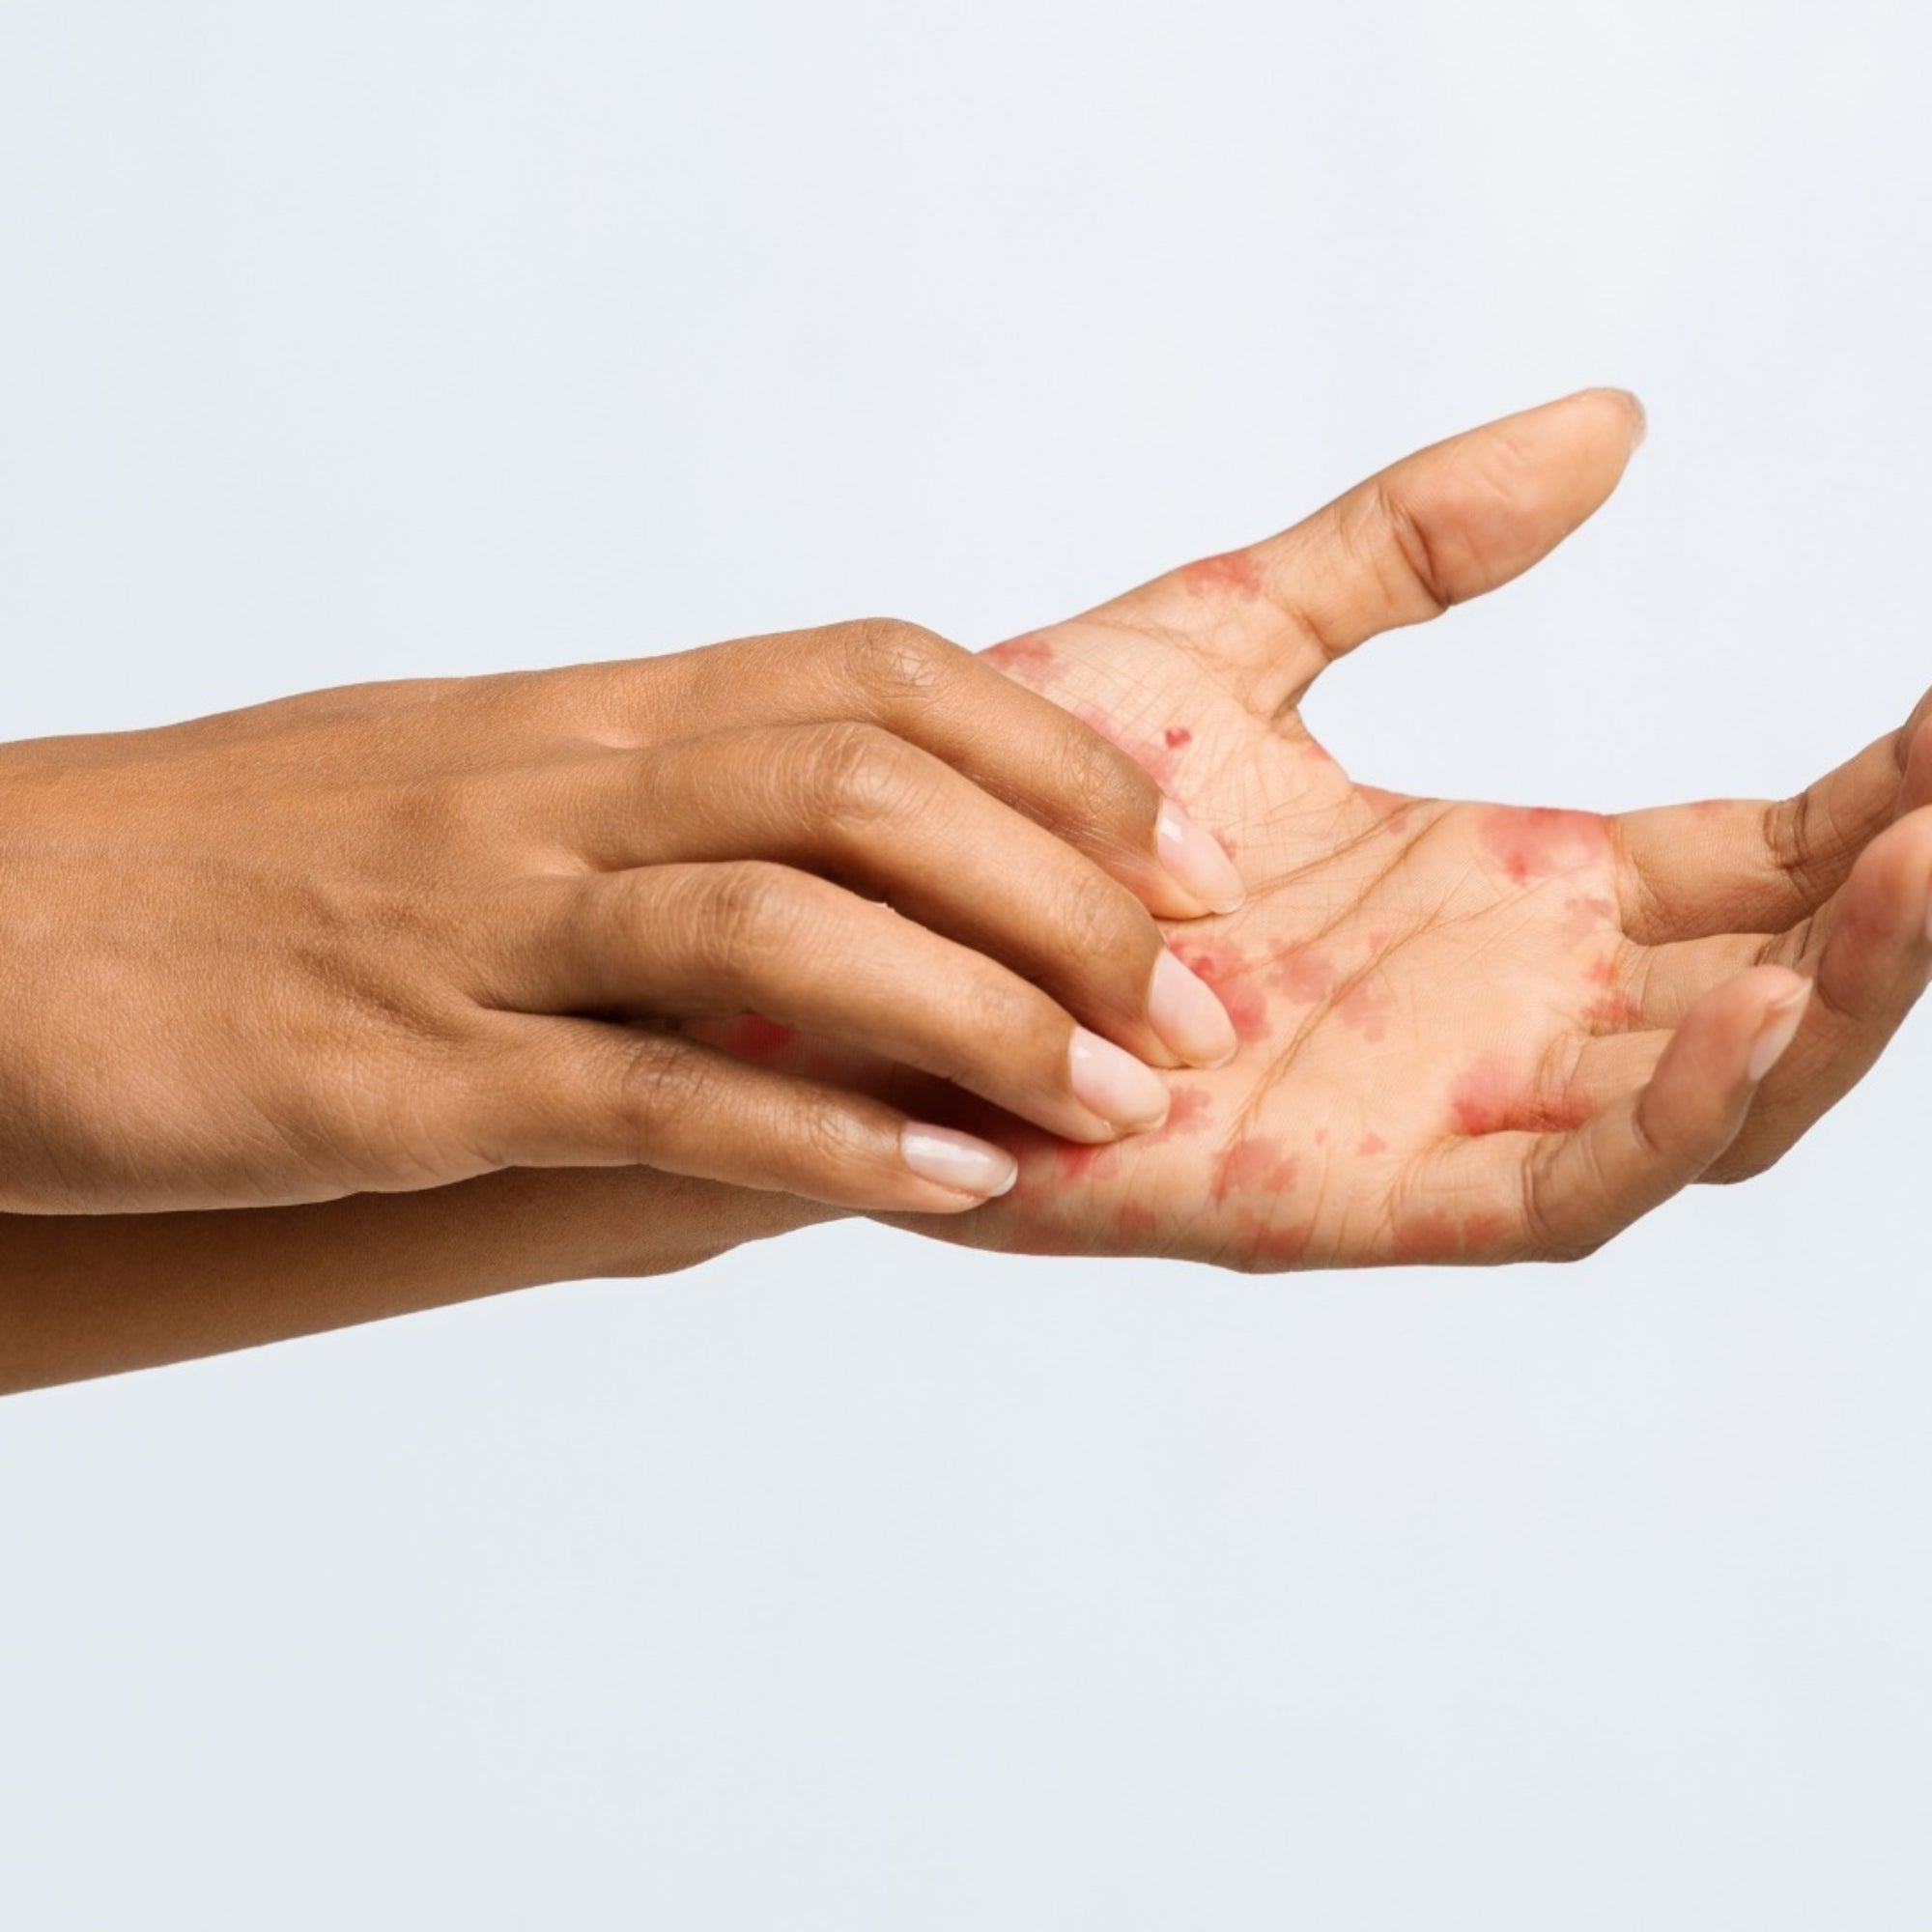 Hand with signs of Eczema